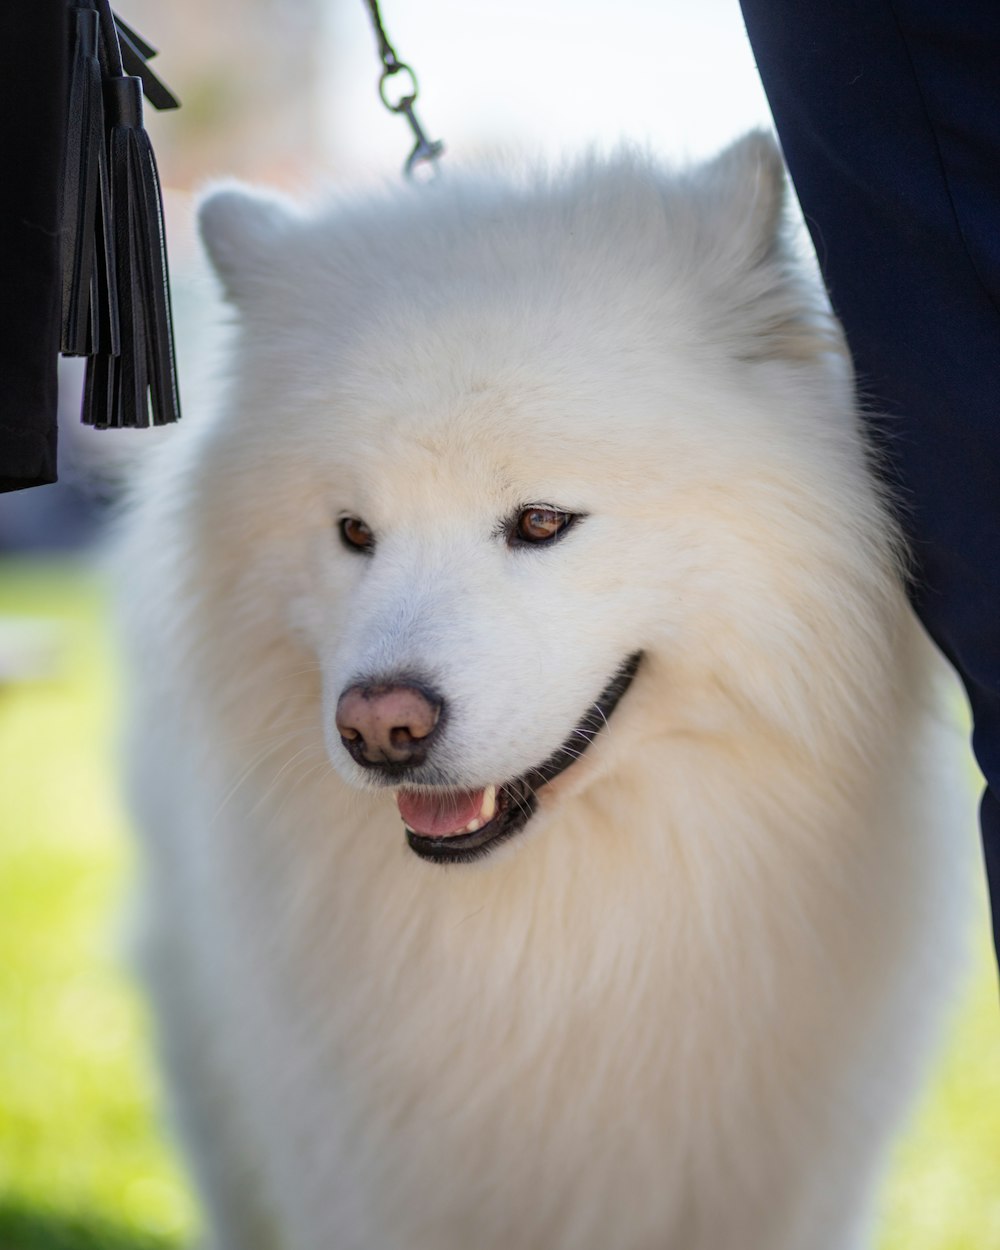 a close up of a white dog on a leash